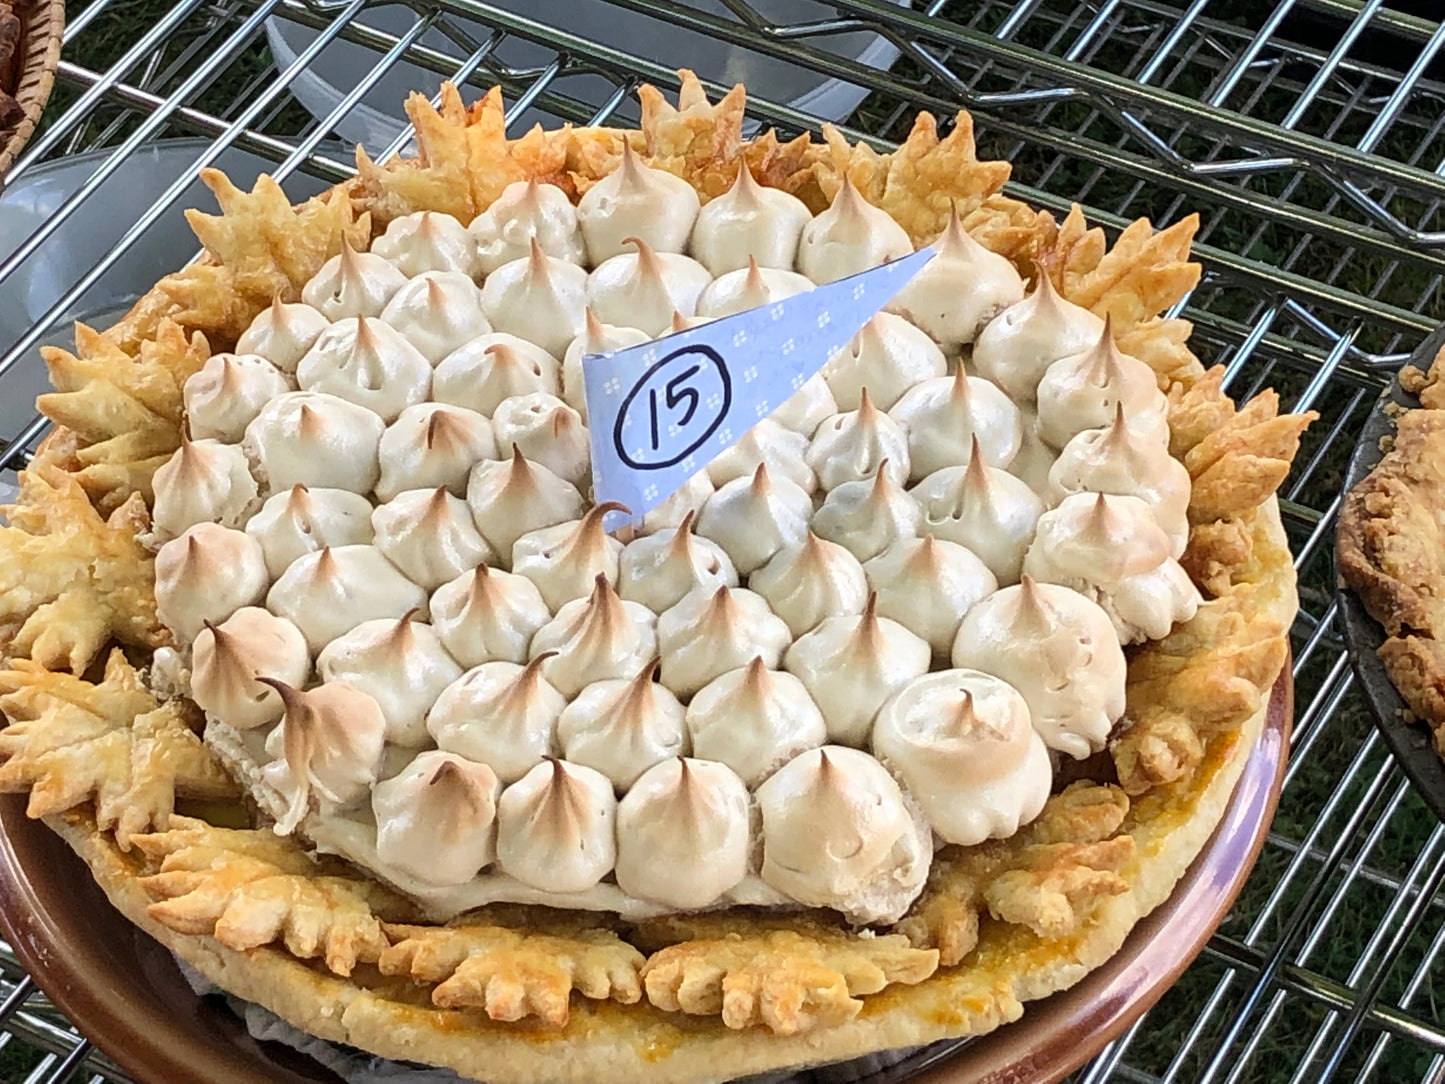 Pie Entry for Judging